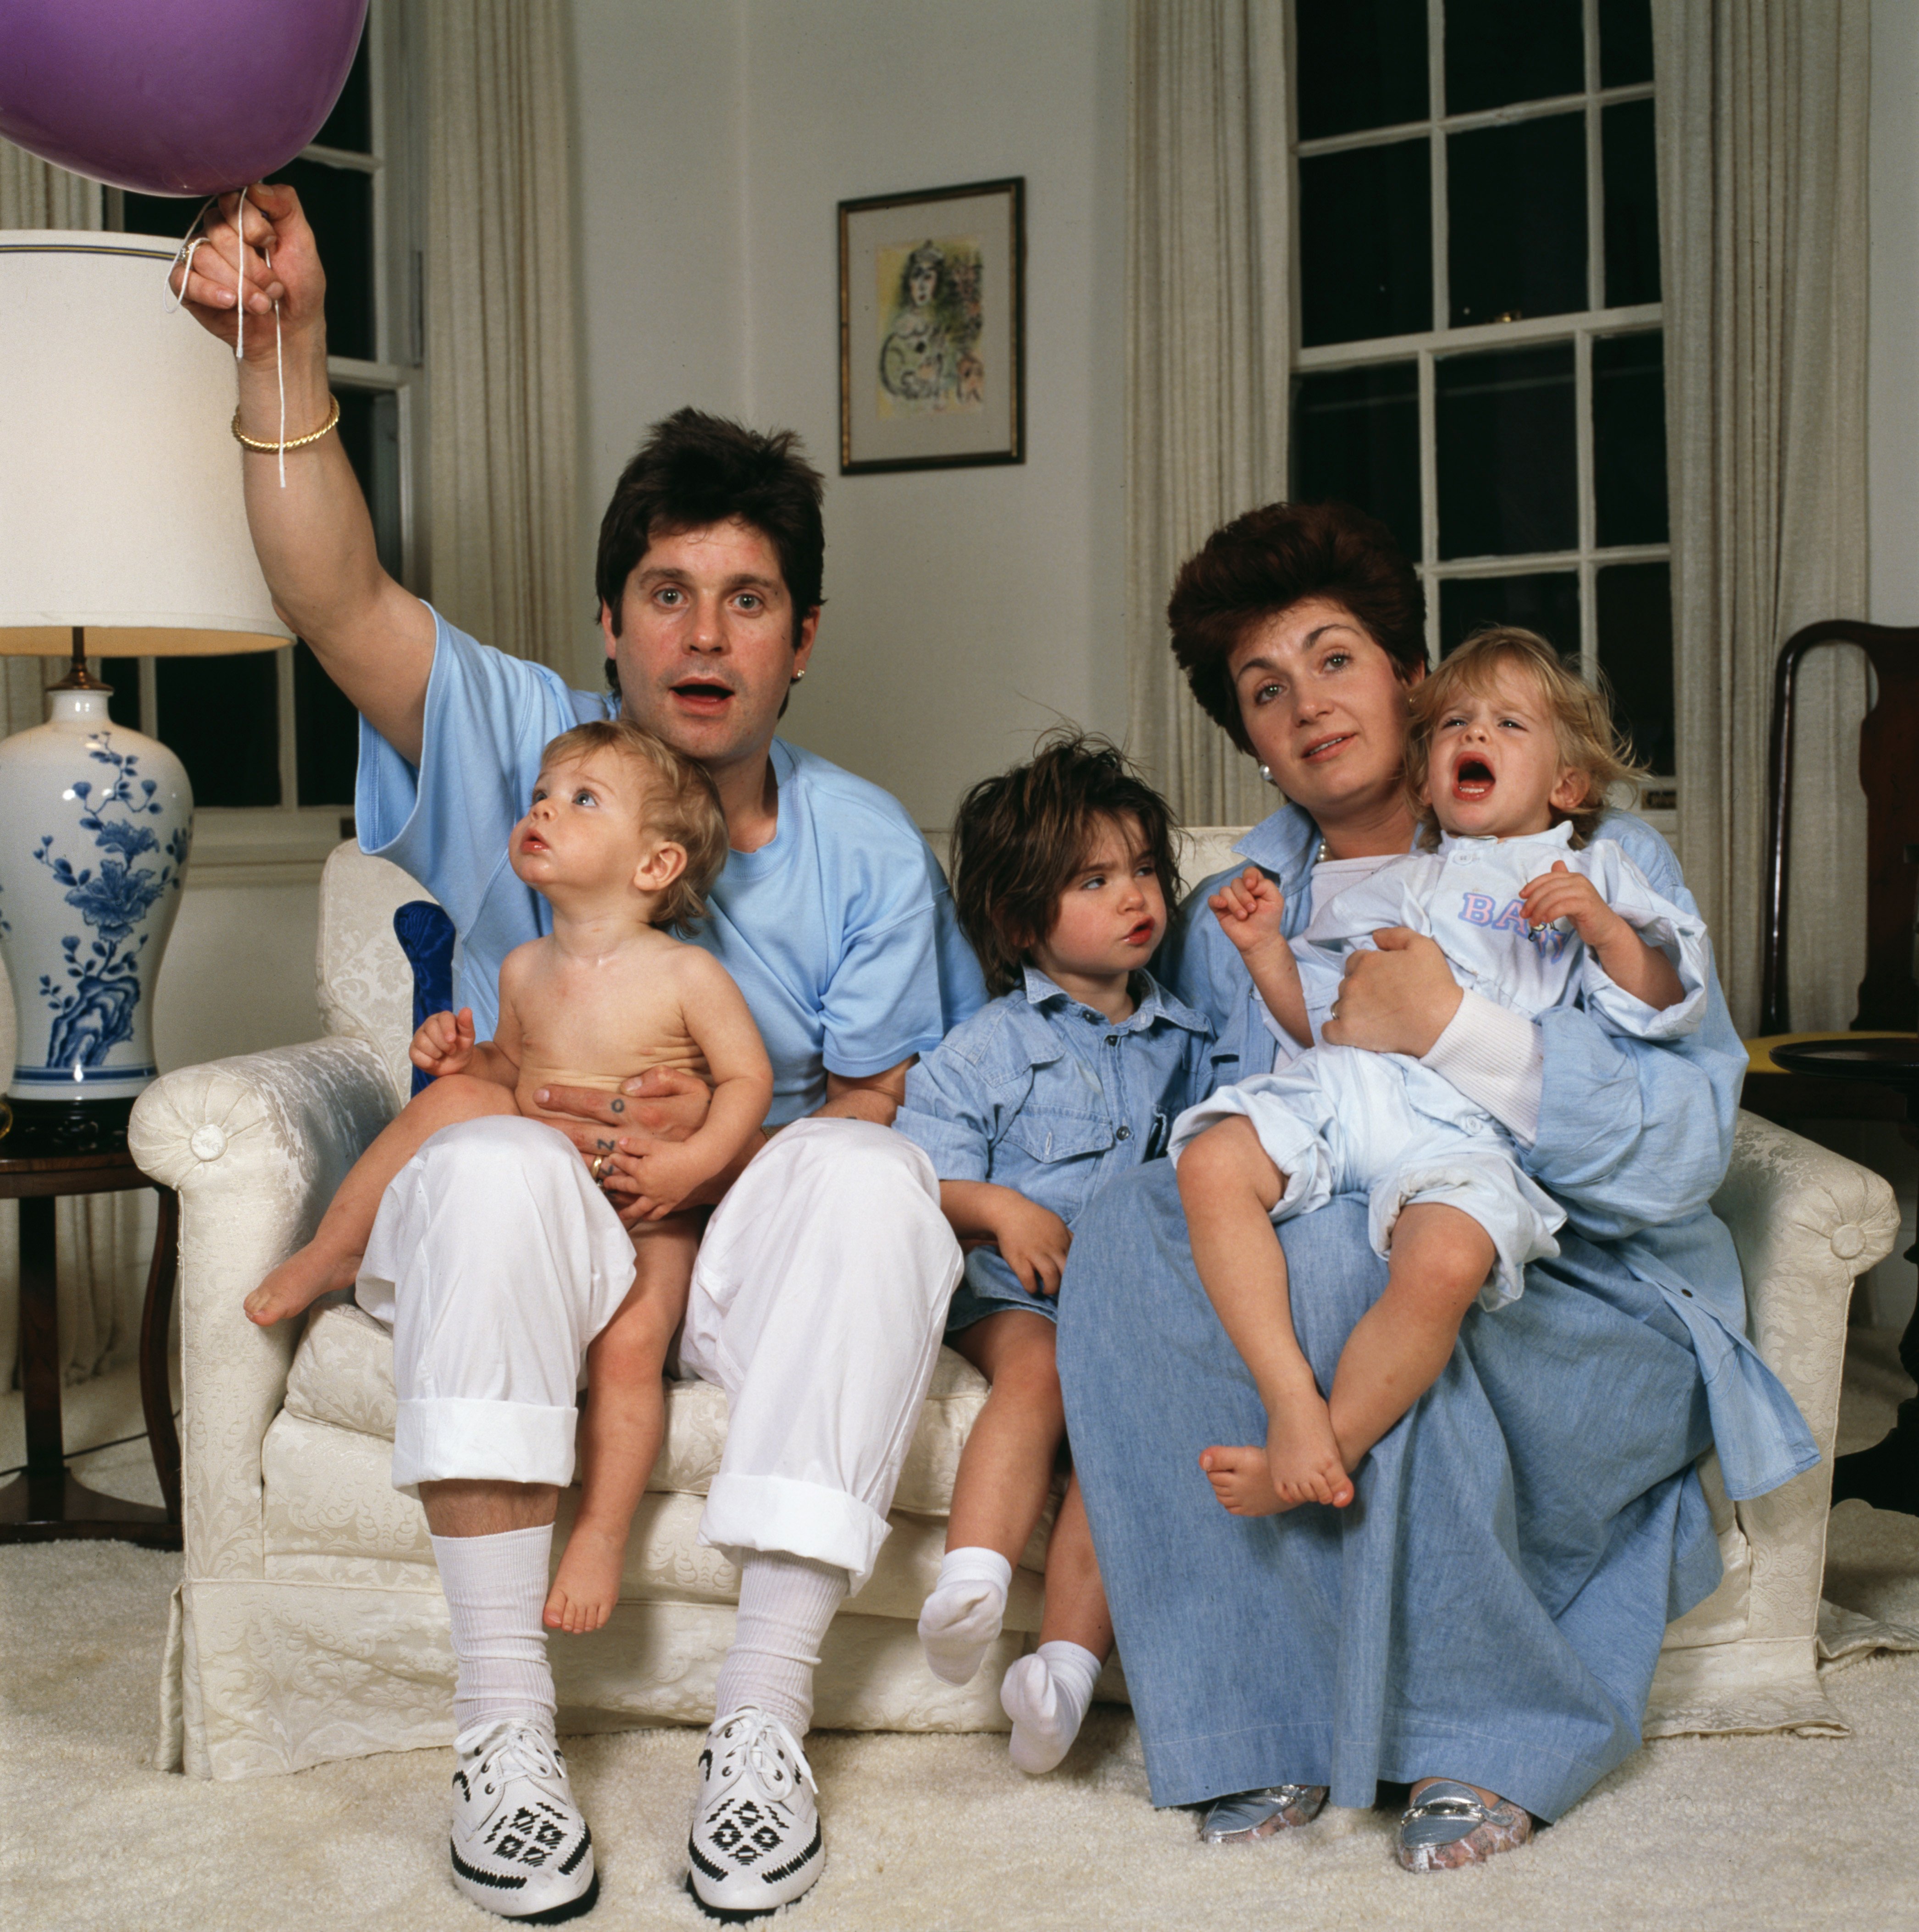 English rock singer Ozzy Osbourne and his wife Sharon and their children Aimee, Kelly and Jack, USA, 1987 | Source: Getty Images